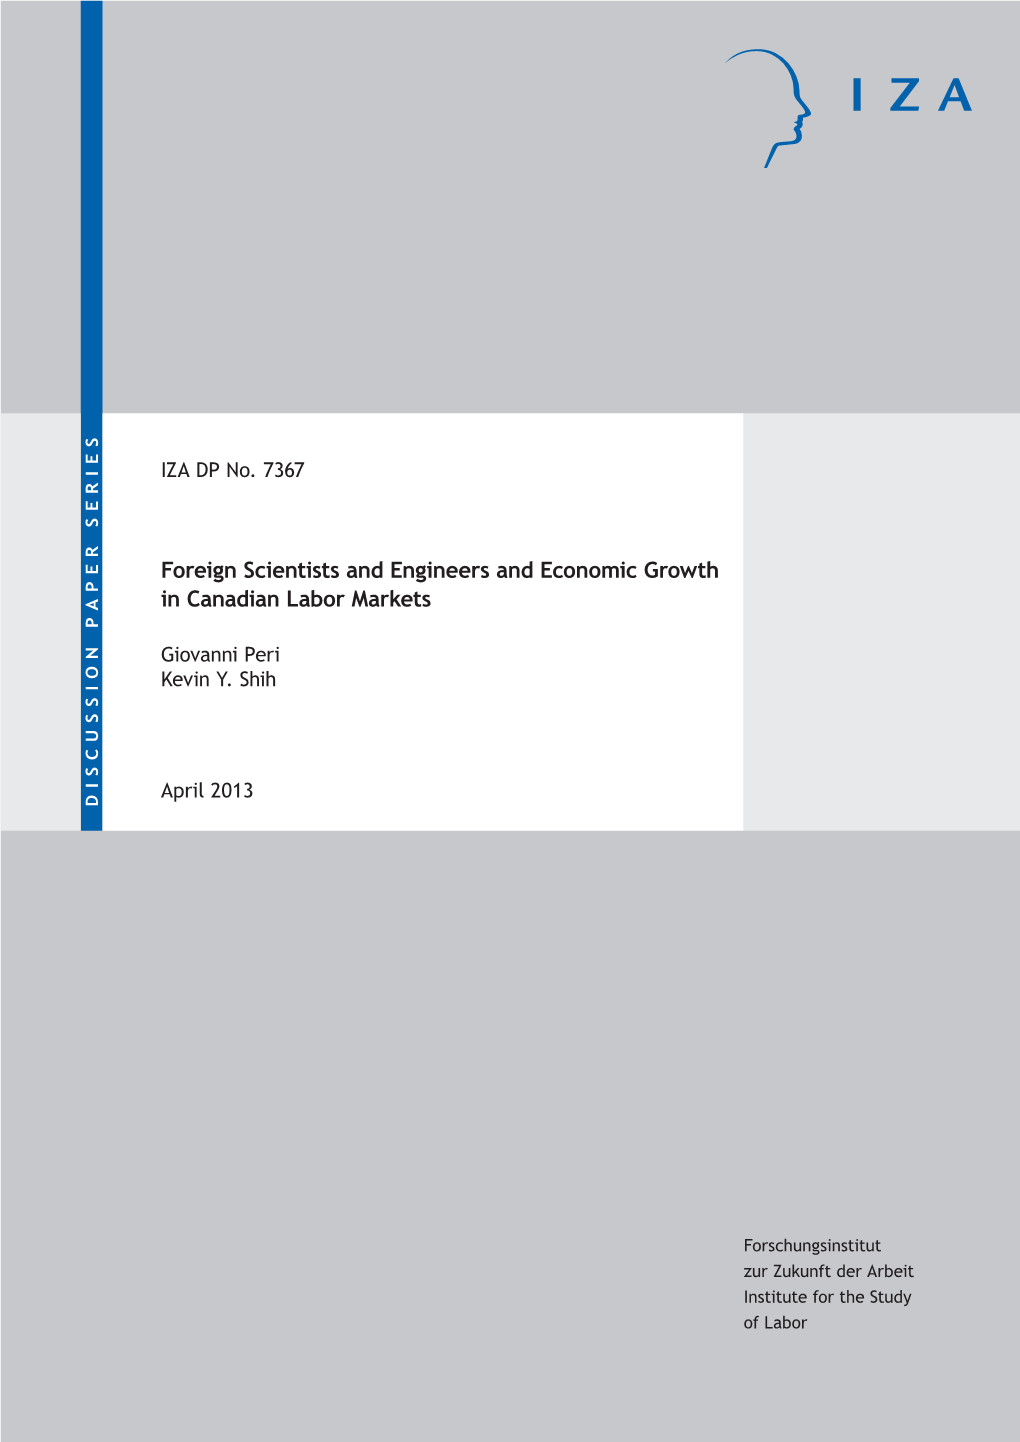 Foreign Scientists and Engineers and Economic Growth in Canadian Labor Markets